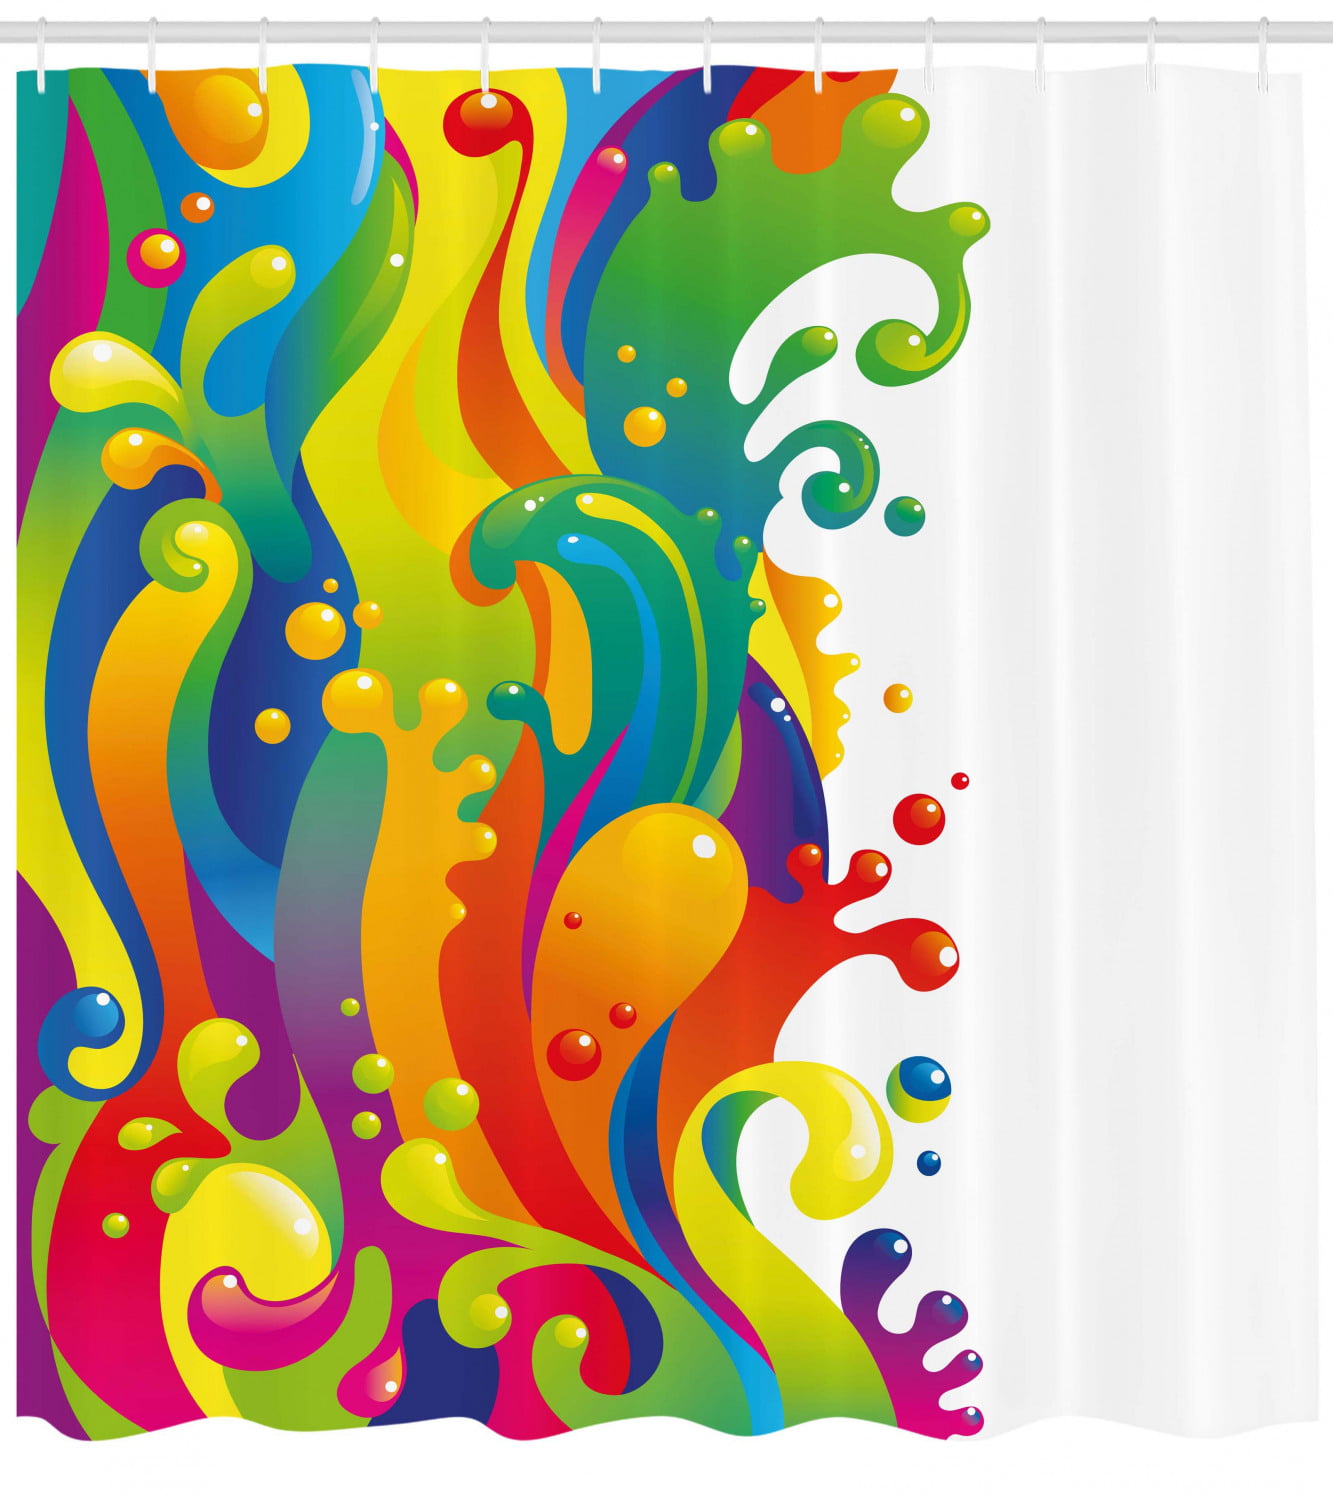 Rainbow Colors Pattern Shower Curtain Fabric Decor Set with Hooks 4 Sizes